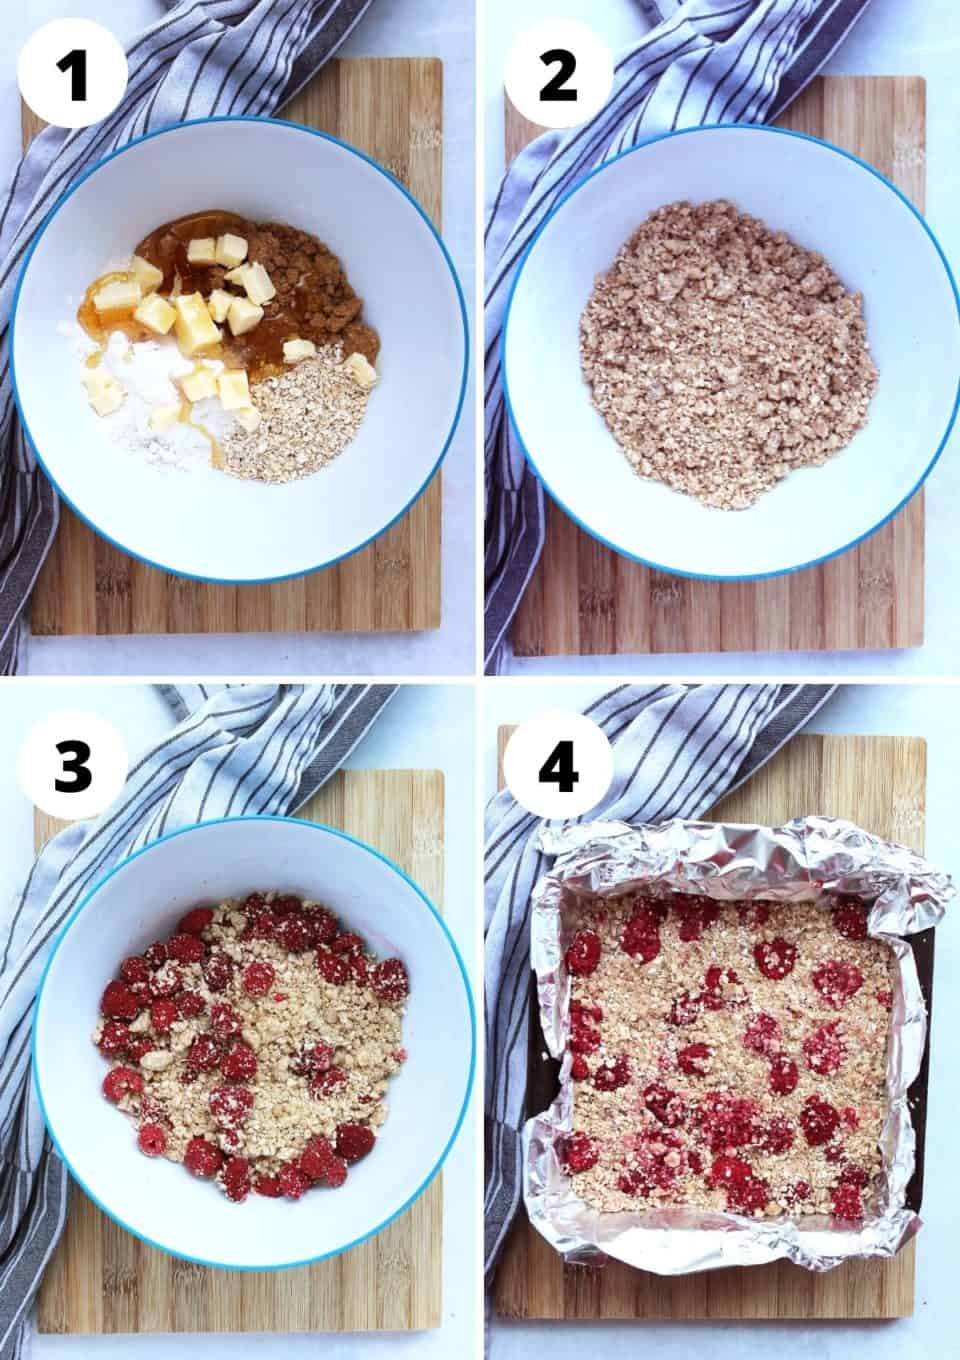 Four step by step photos to show how to make the bars.